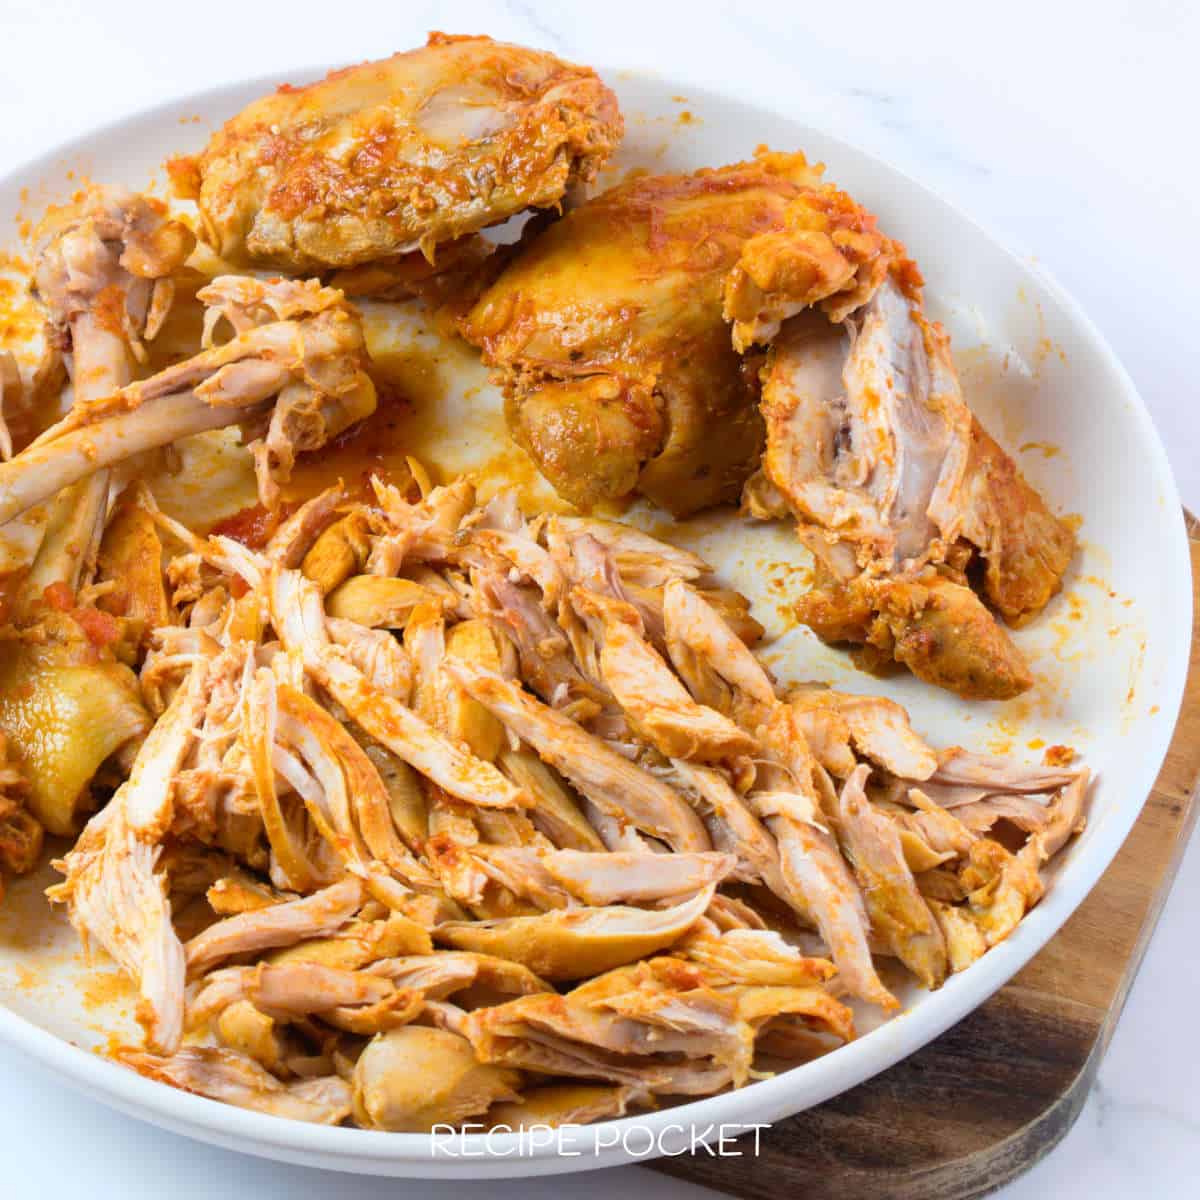 Shredded cooked chicken.